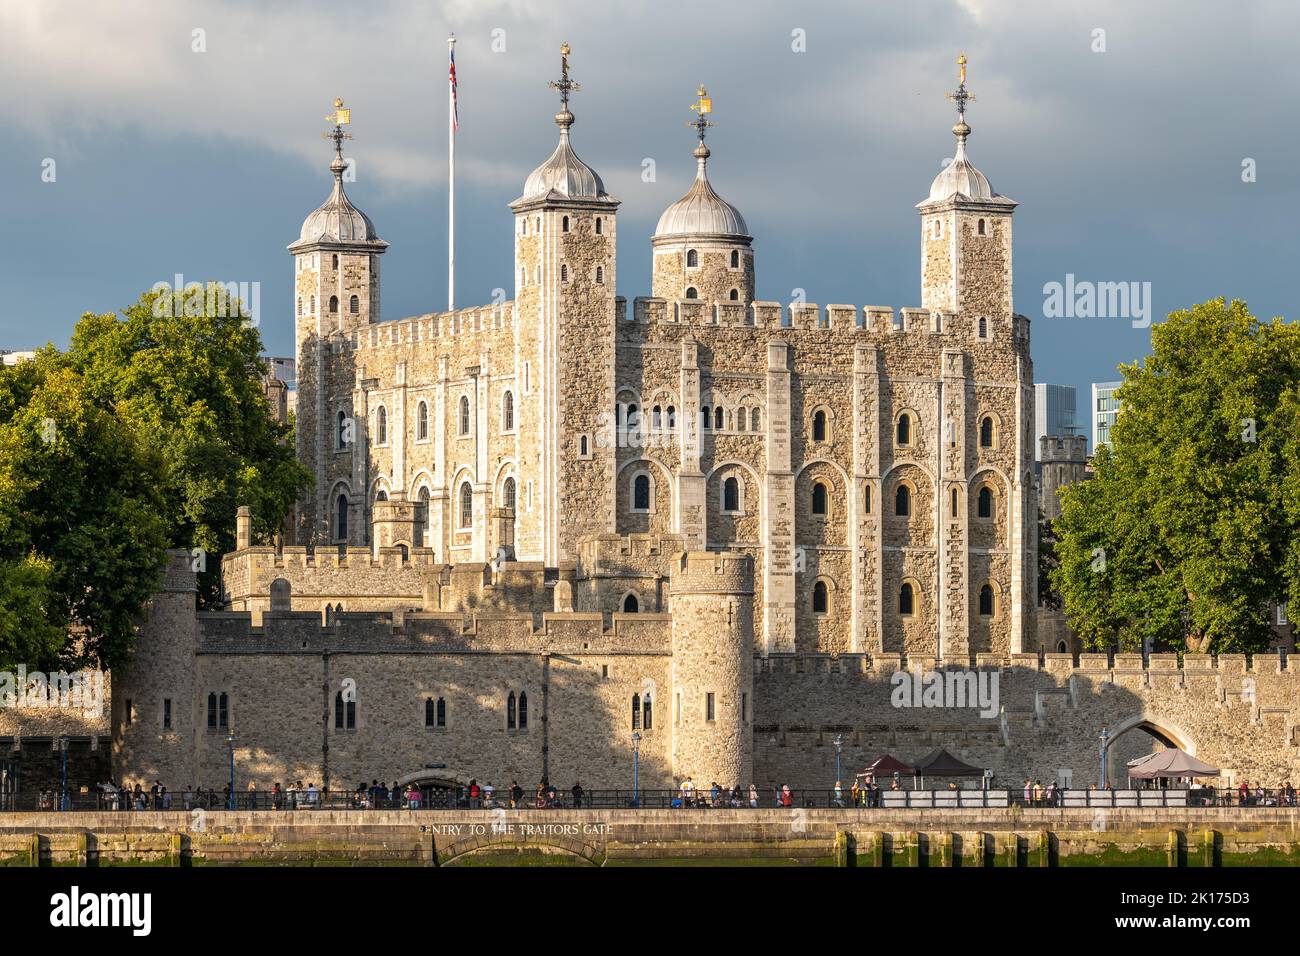 The Tower of London in evening sunshine against a dark foreboding sky. Shot 2 days after the death of Queen Elizabeth II, flags not at half-mast. Stock Photo